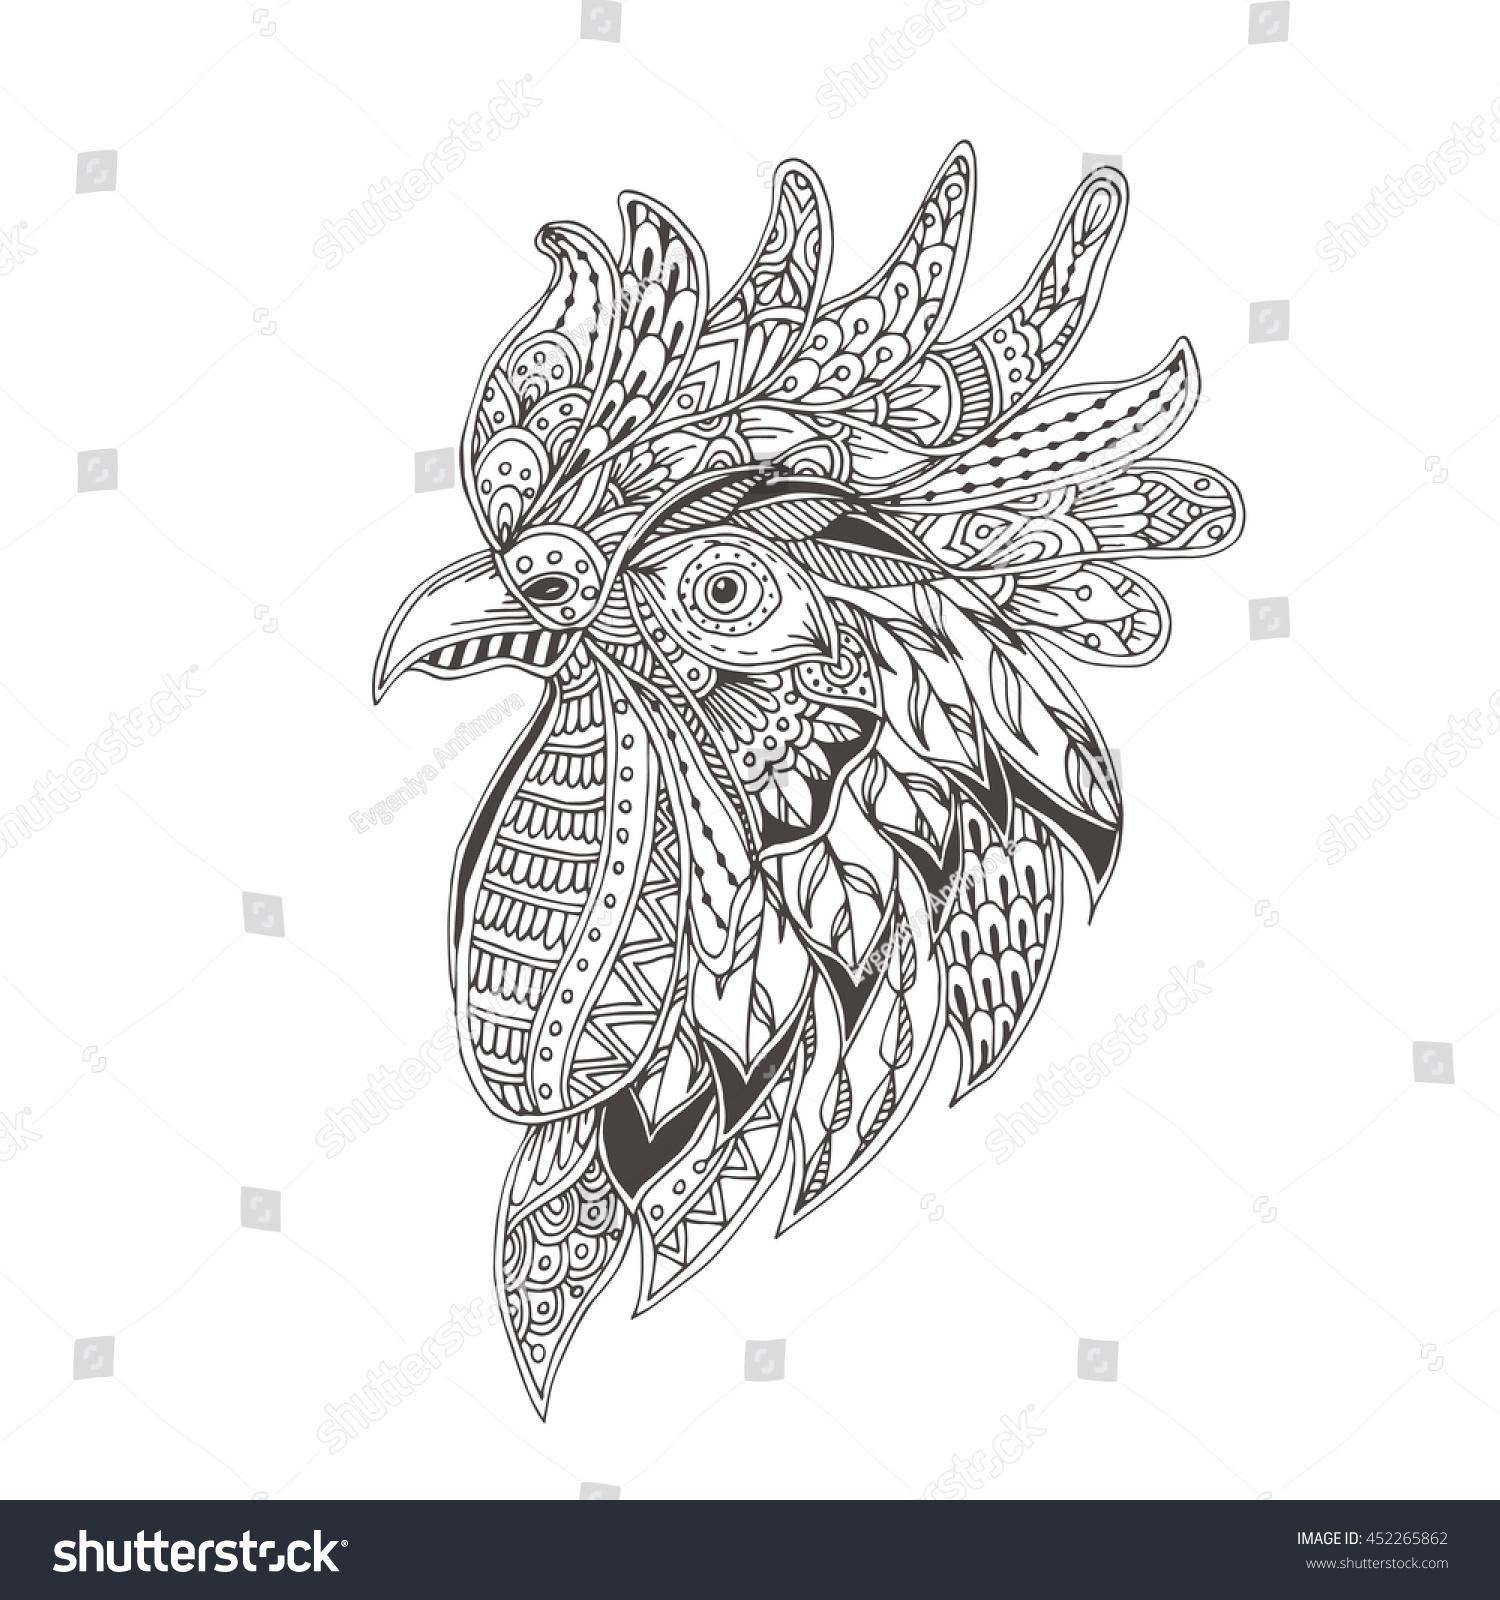 Handdrawn Rooster Ethnic Floral Doodle Pattern Stock Vector 452265862 ...